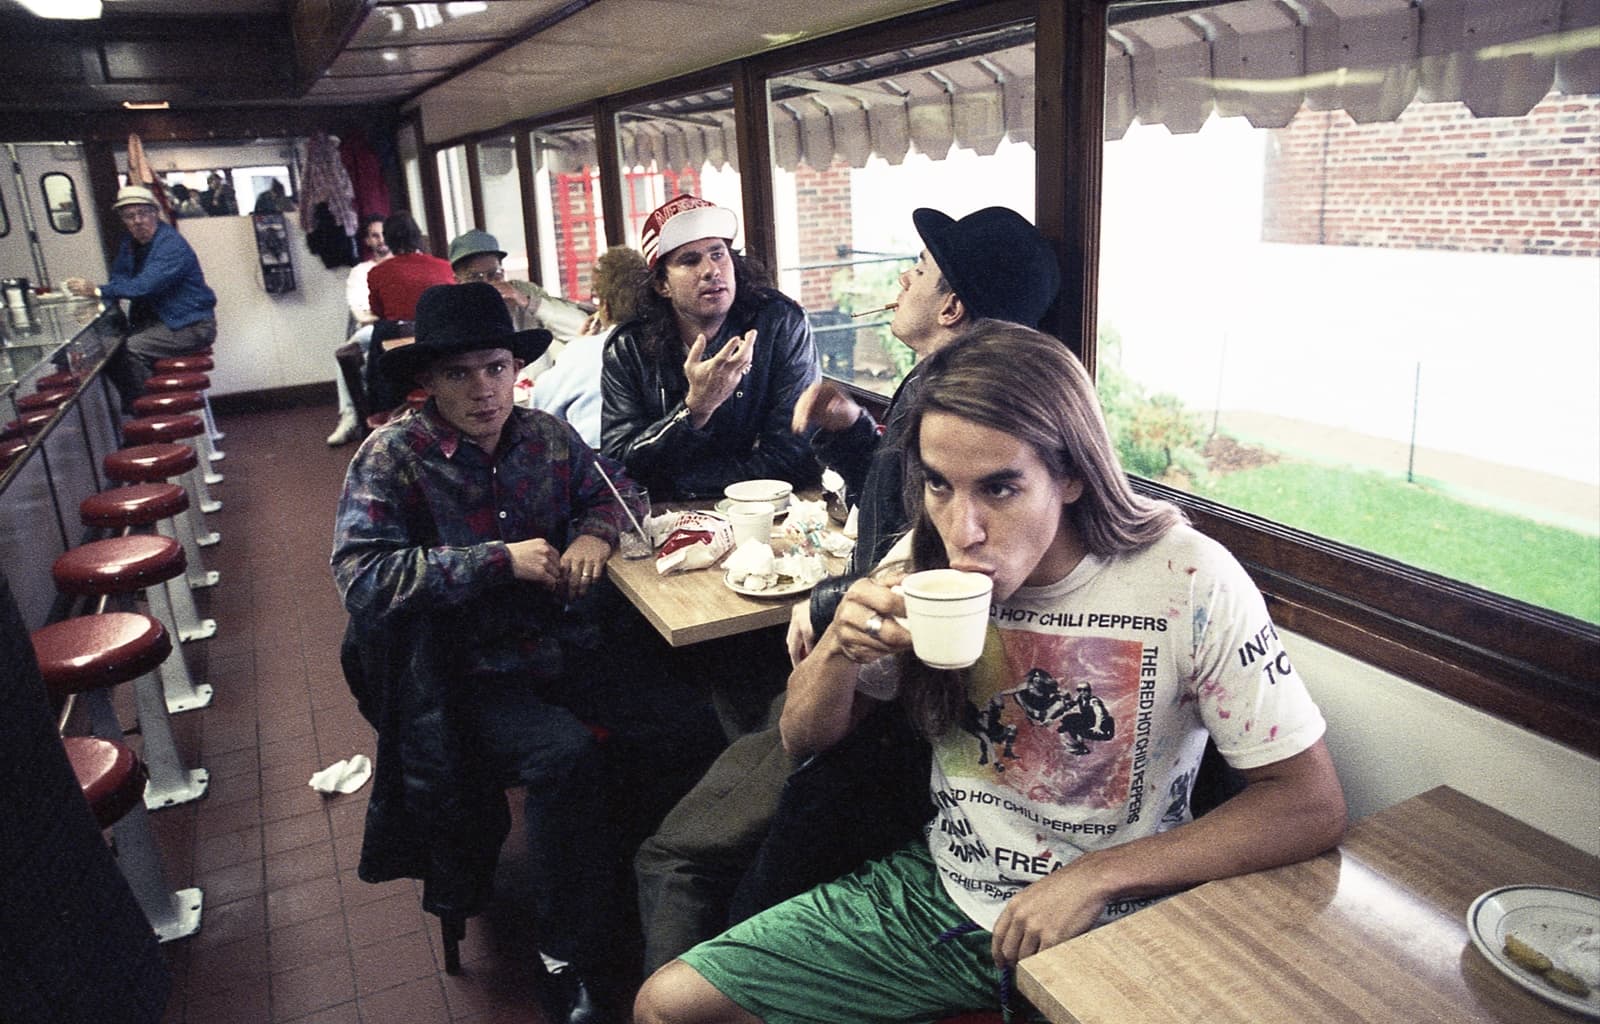 Red Hot Chili Peppers in the Capitol Diner in Lynn. (Courtesy Julie Kramer)